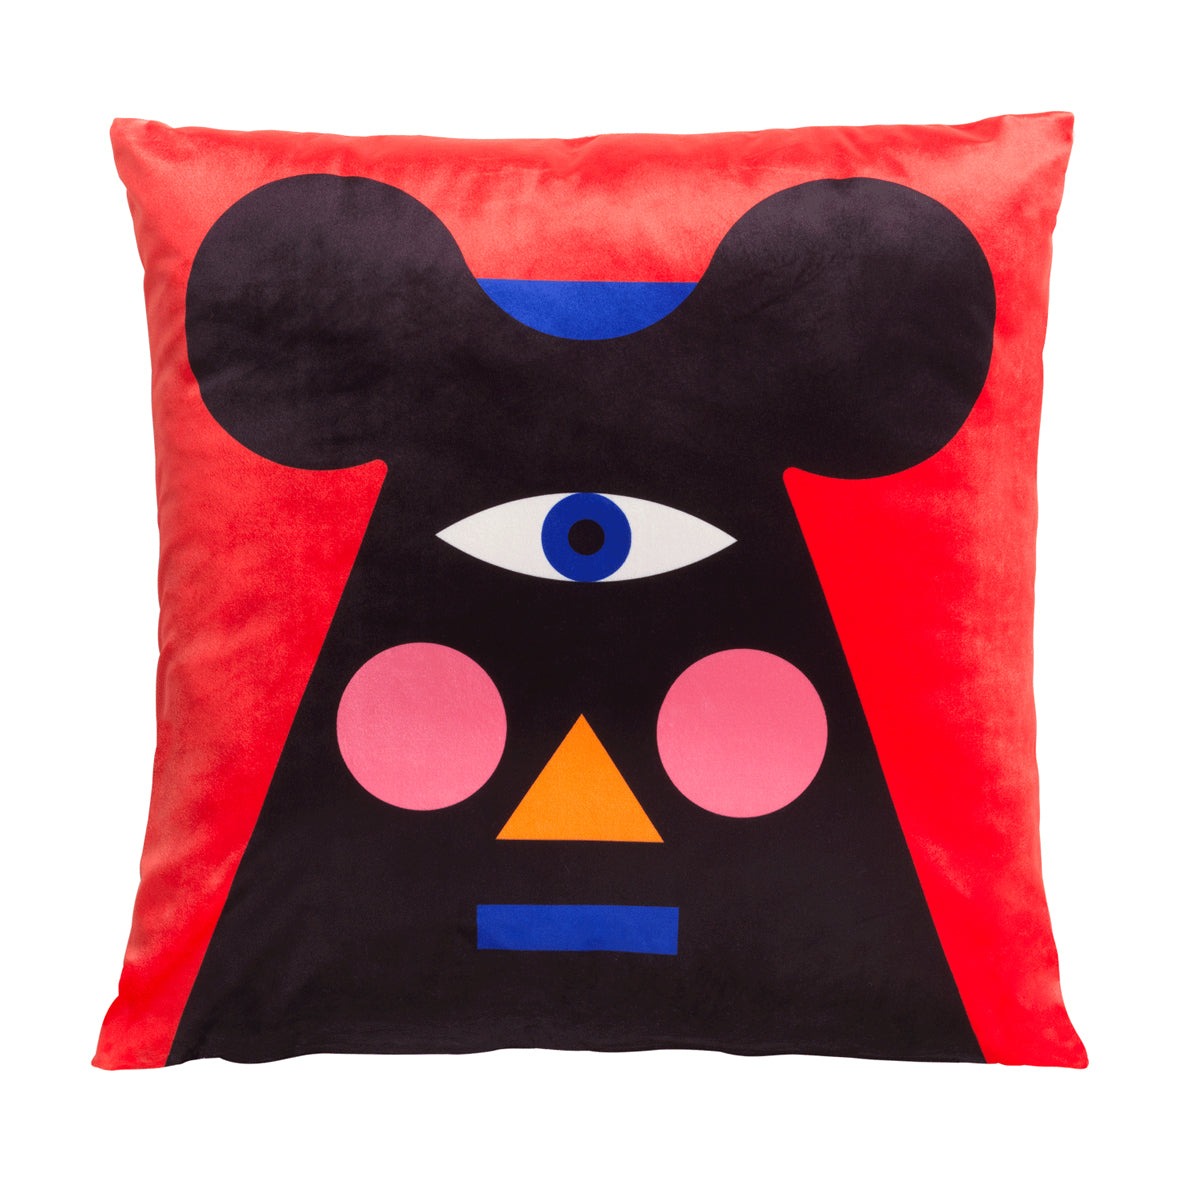 Oggian Mr Mouse Cushion Cover by Marco Oggian